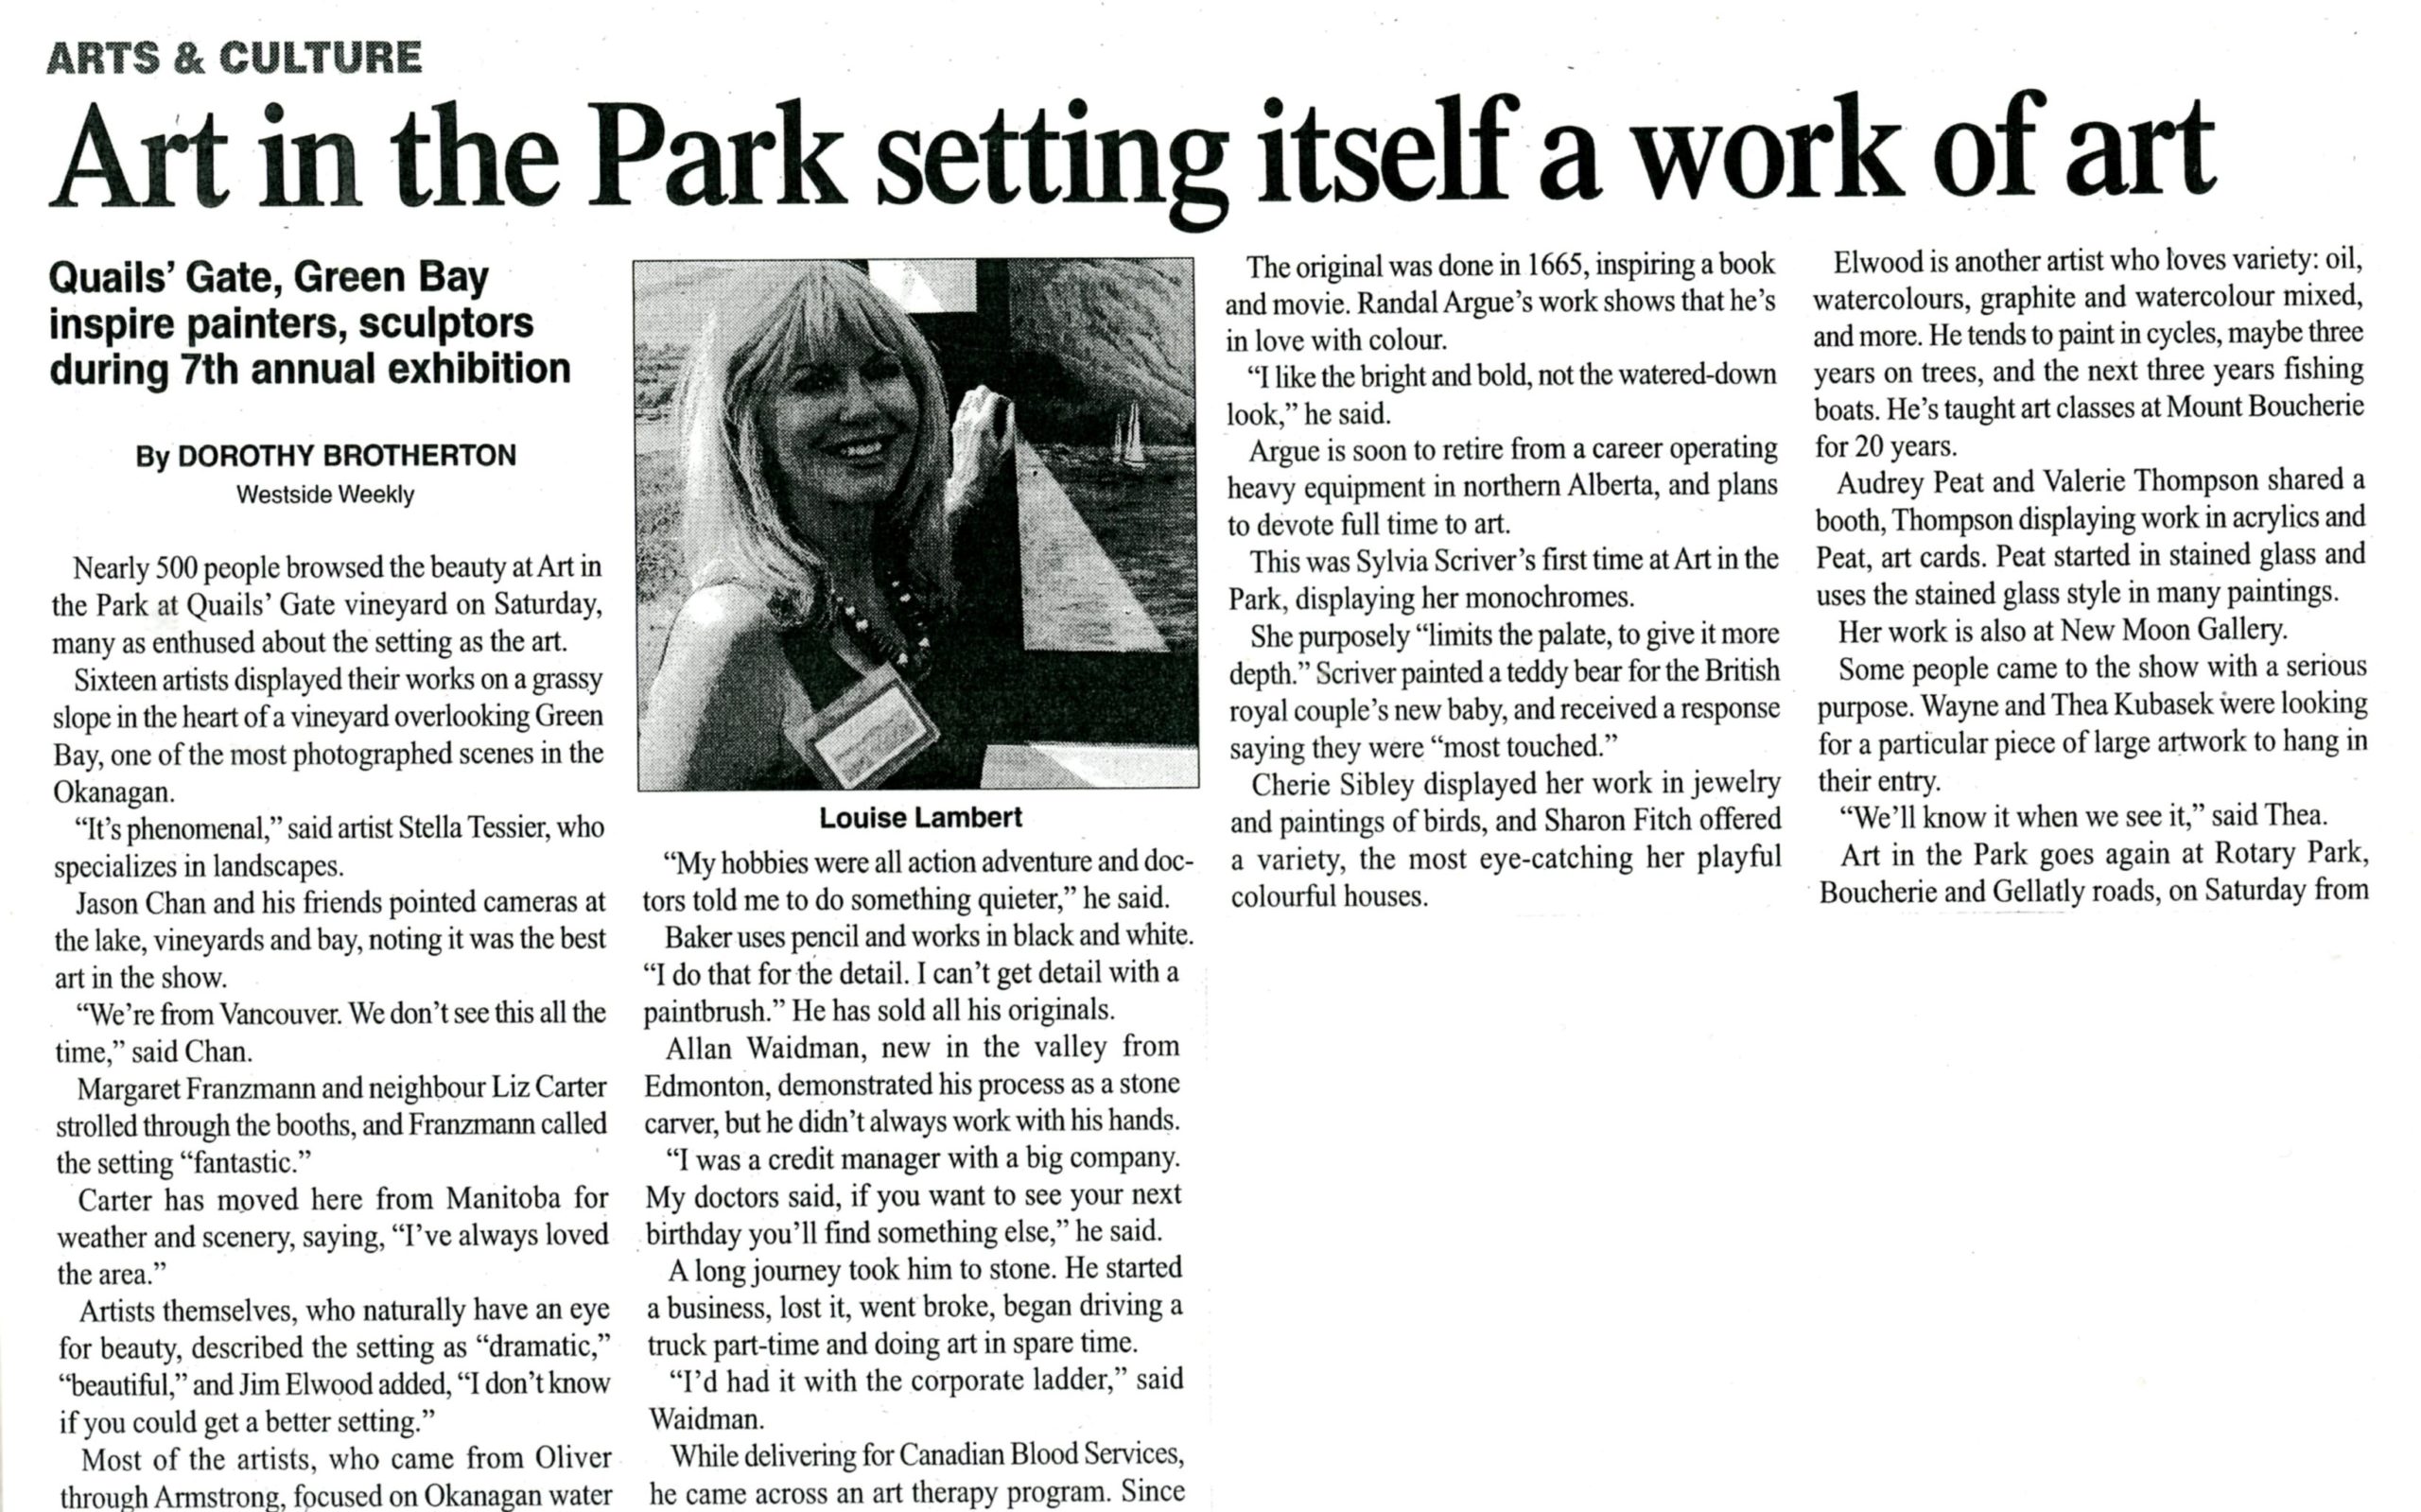 In the news - art in the park